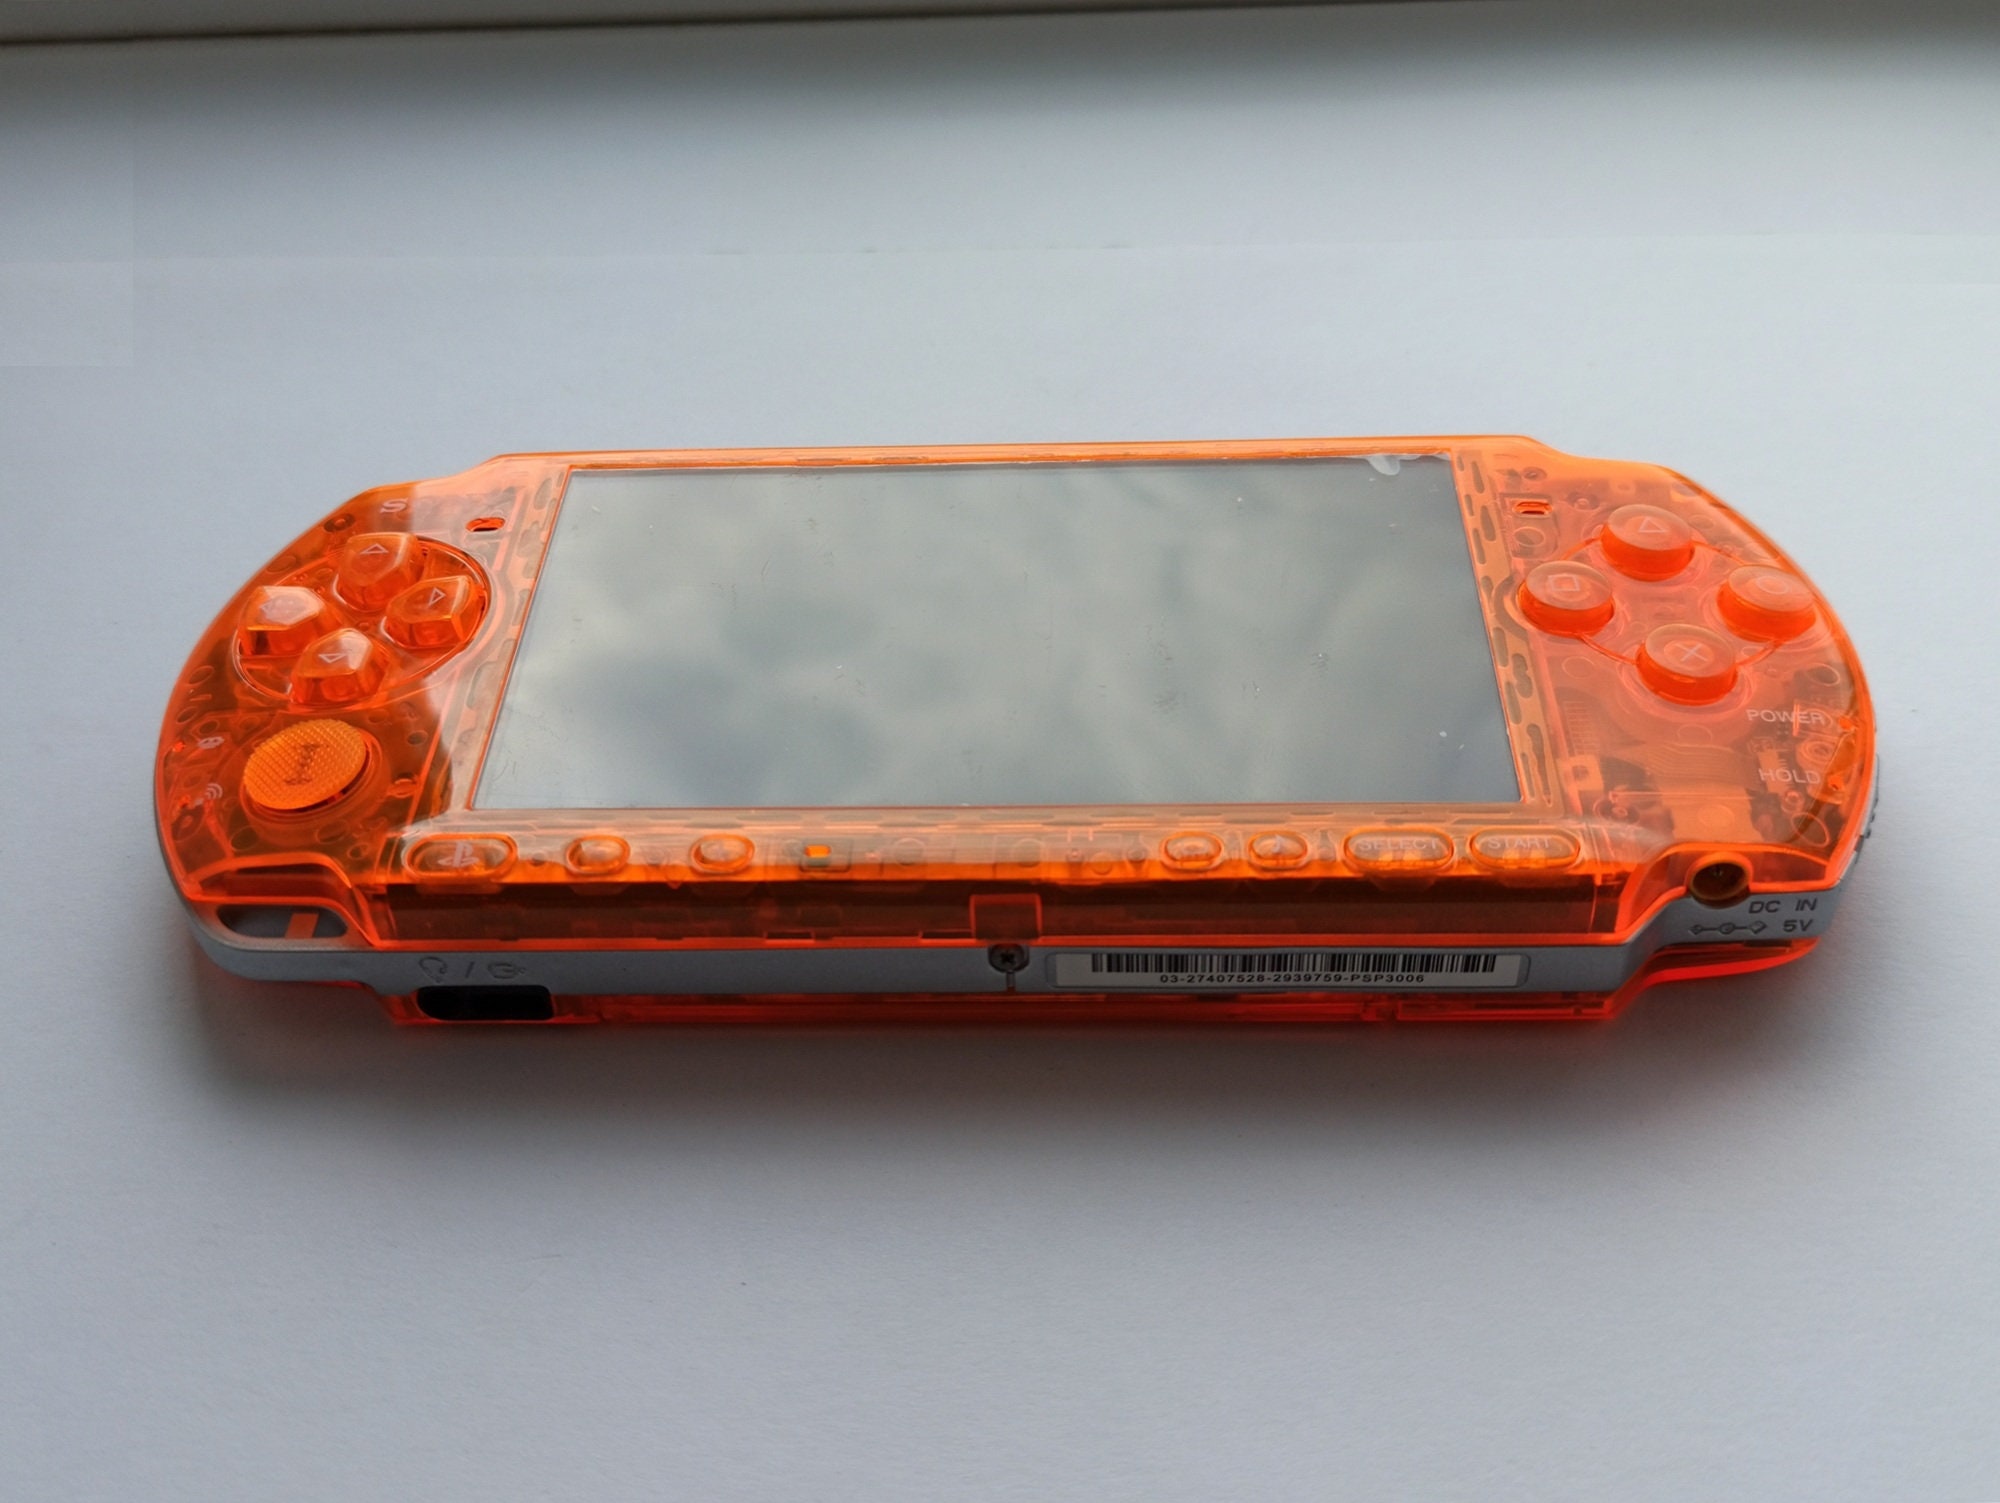 Sony Playstation Portable (PSP) 3000 Series Handheld Gaming Console System  - Orange (Renewed)